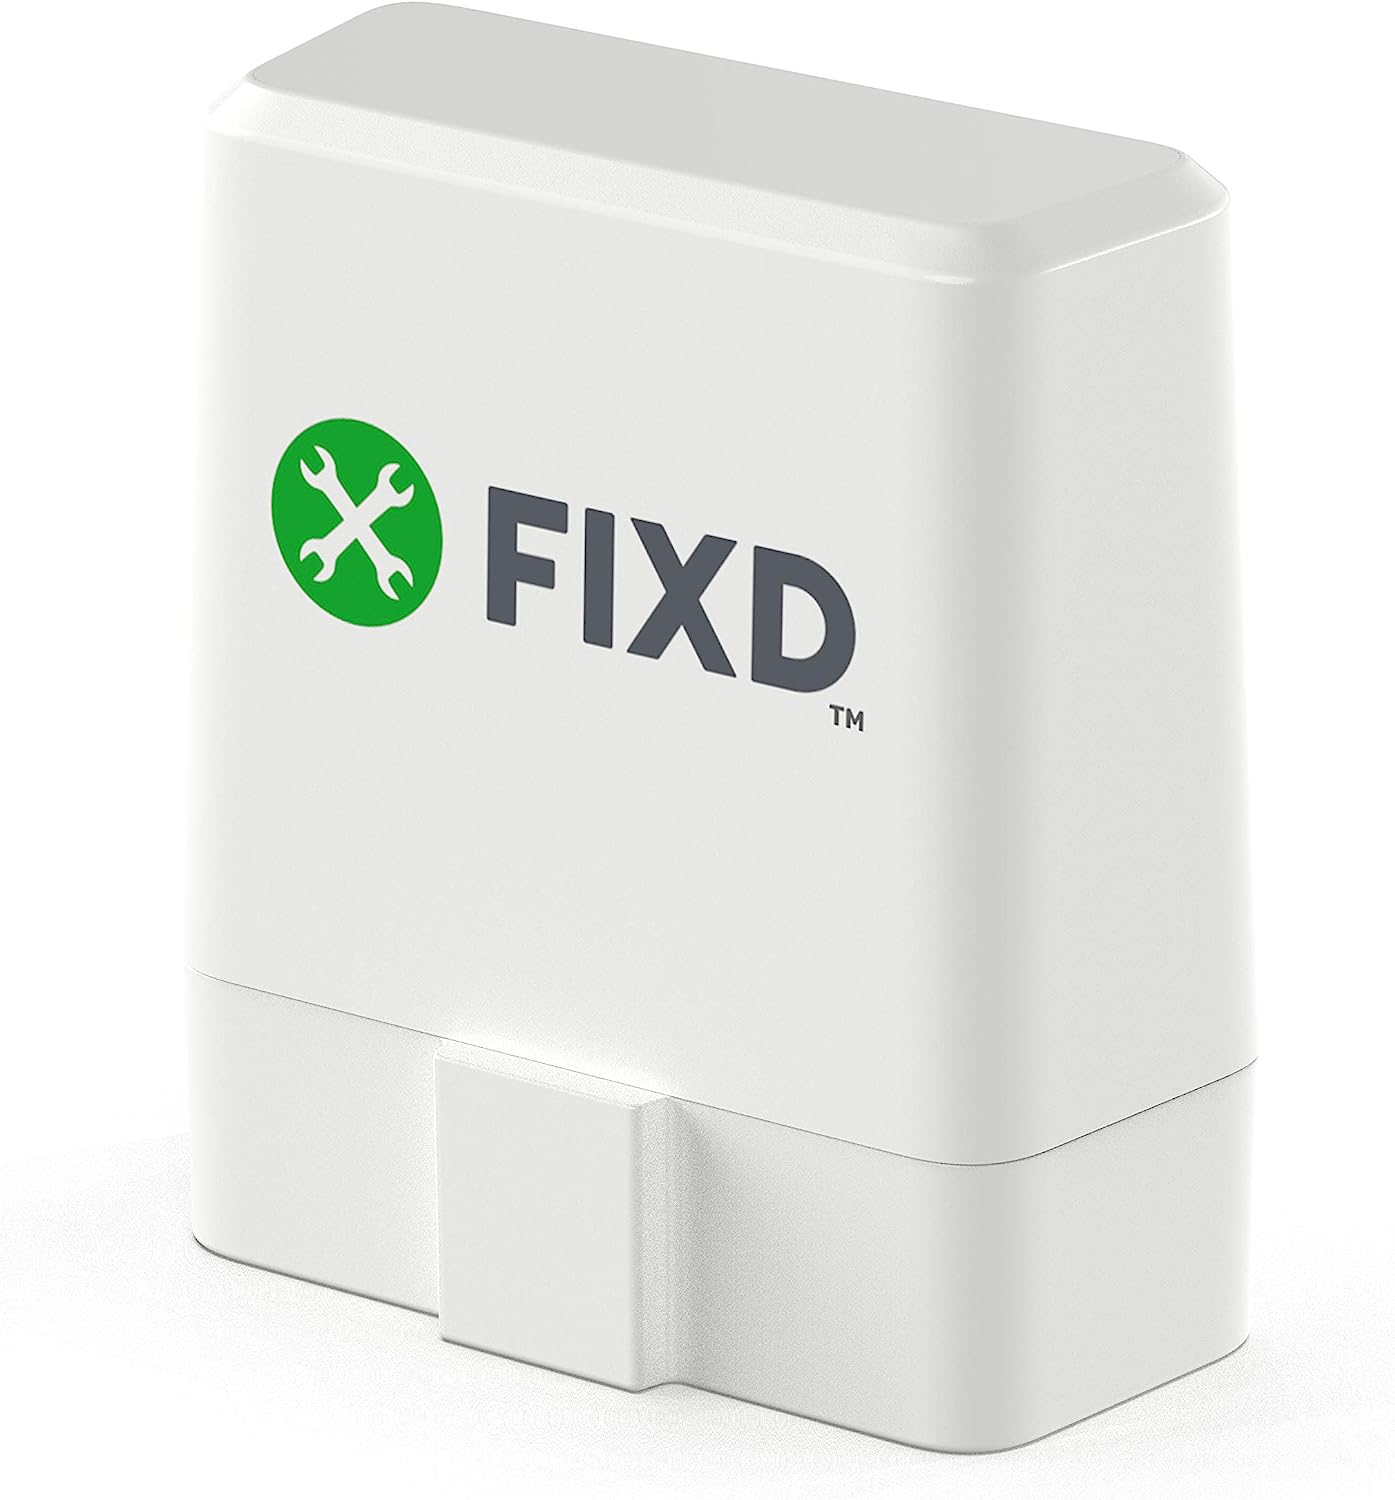 FIXD Bluetooth OBD2 Scanner for Car - Car Code Readers [...]